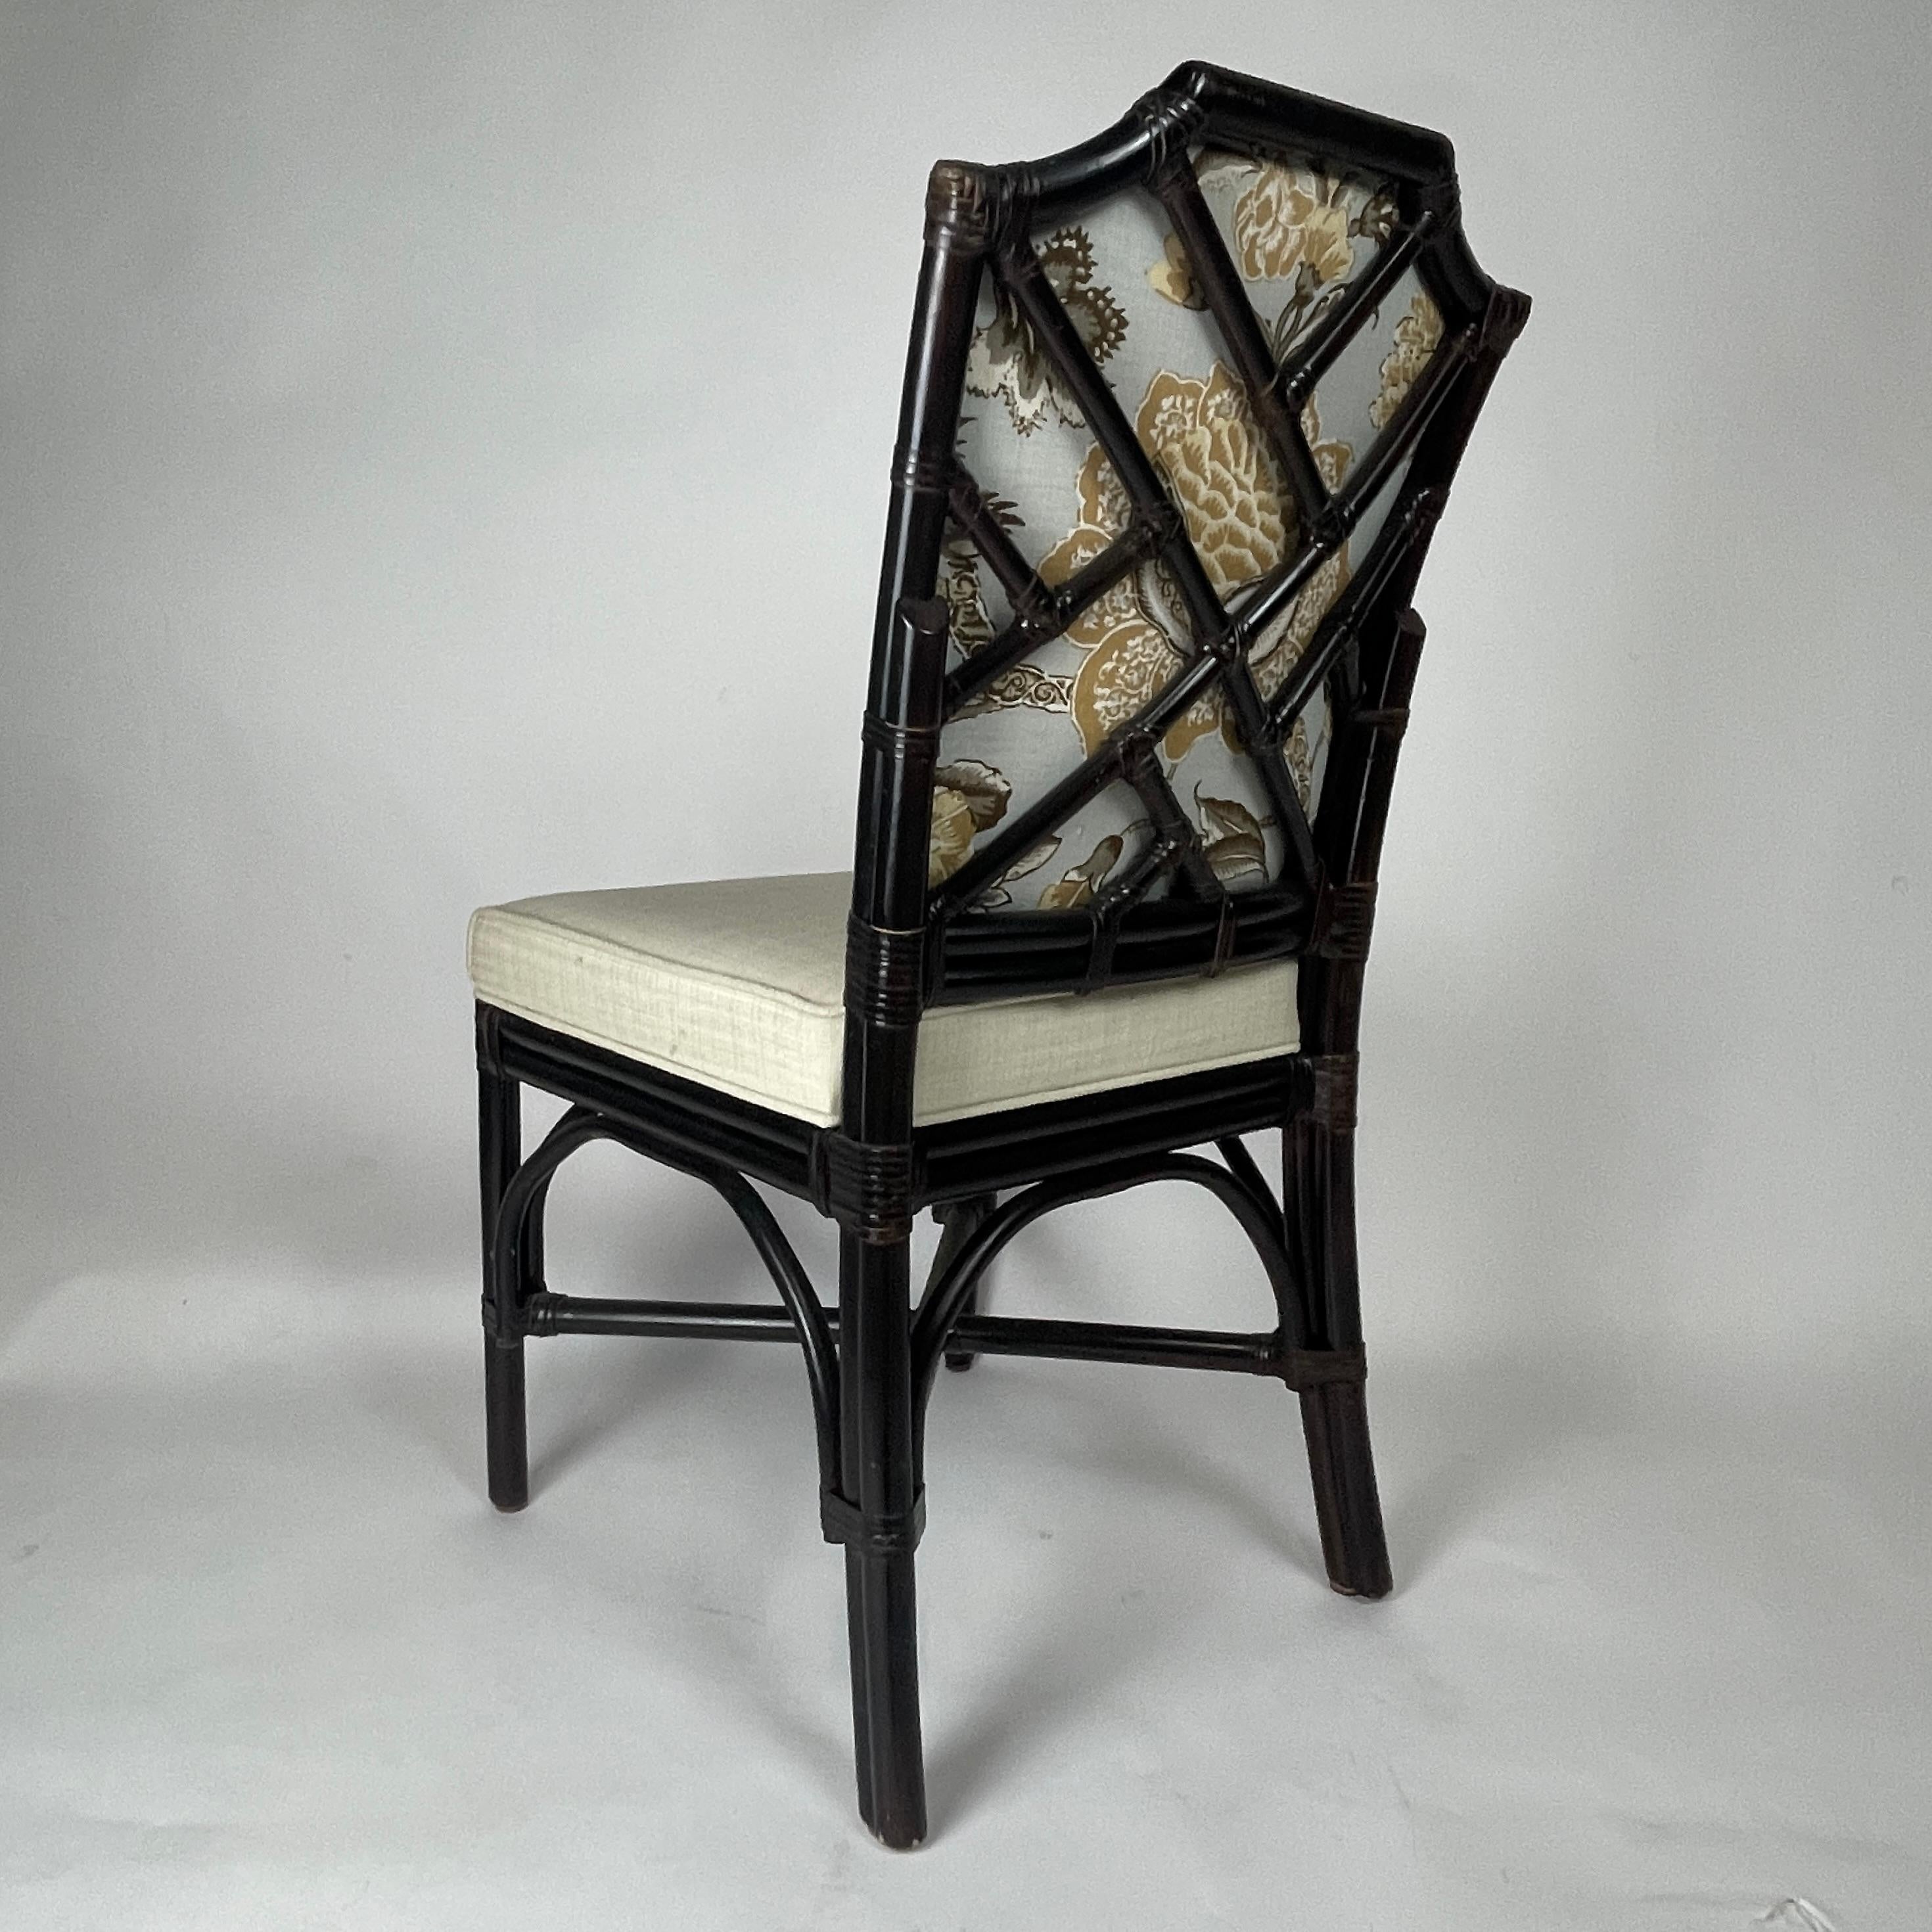 20th Century 6 Chinoiserie Bamboo Rattan Chinese Chippendale Dining Chairs 12 Available For Sale